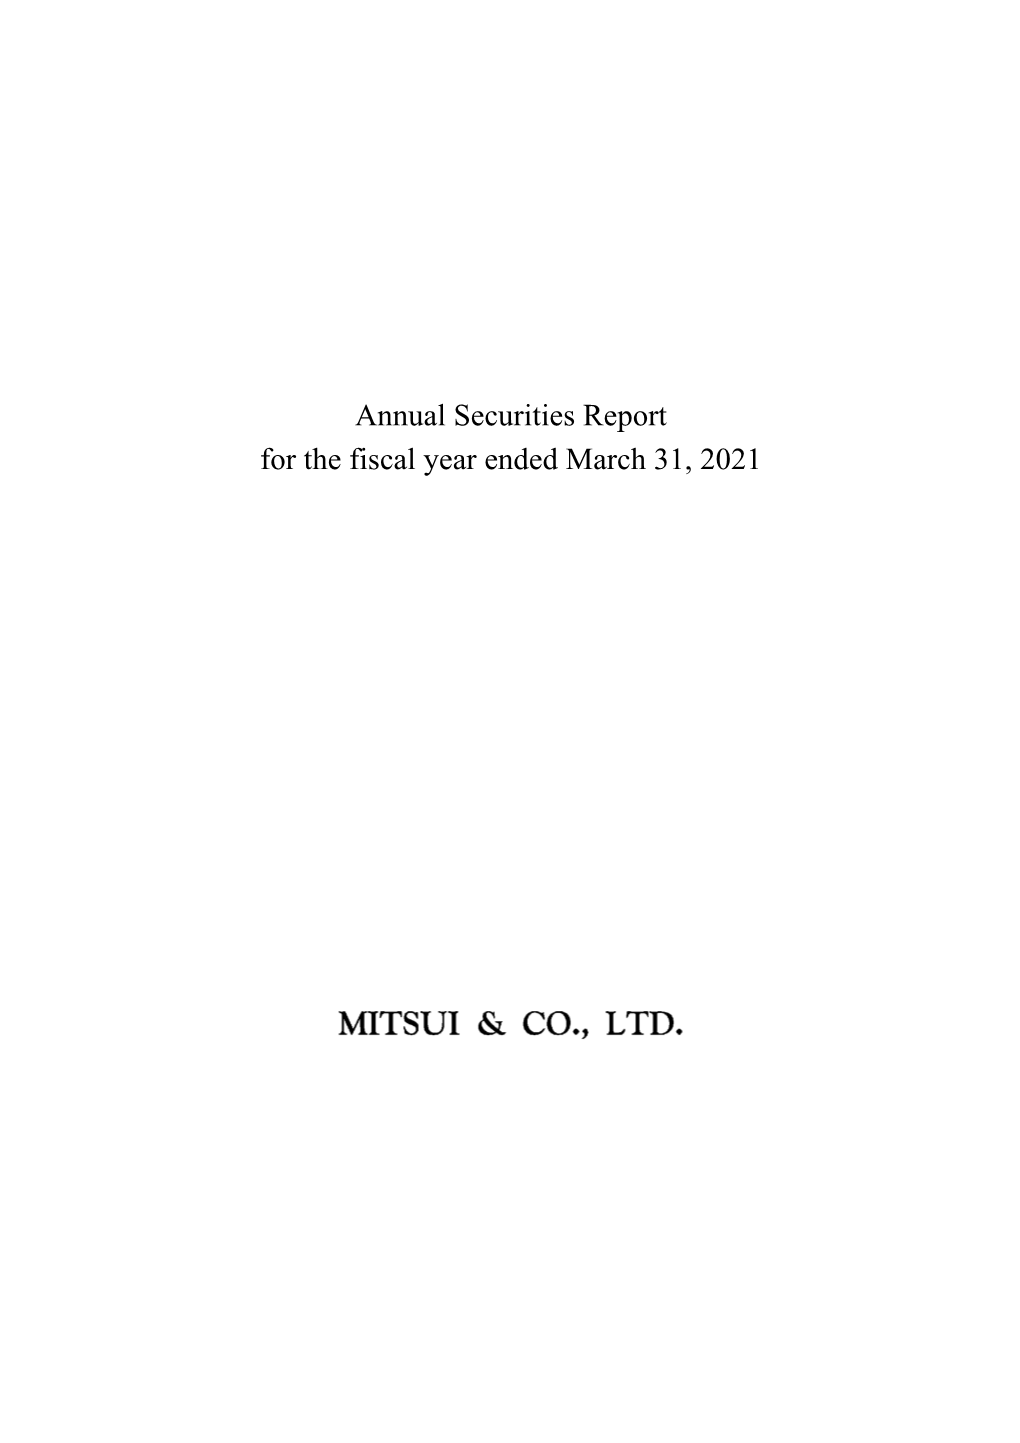 Annual Securities Report for the Fiscal Year Ended March 31, 2021 Certain References and Information